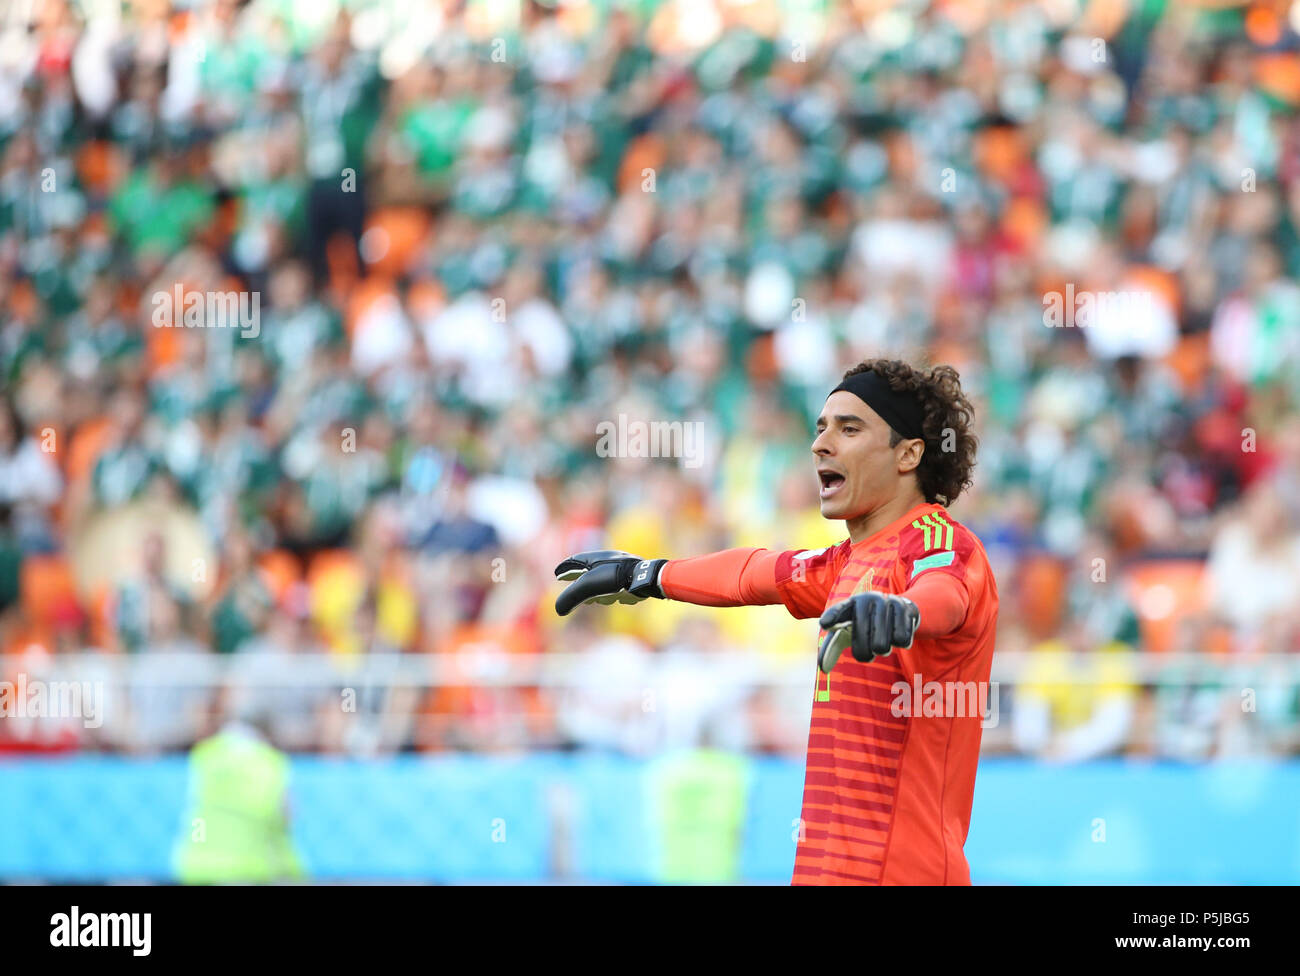 Yekaterinburg, Russia. 27th June, 2018. Goalkeeper Guillermo Ochoa of Mexico reacts during the 2018 FIFA World Cup Group F match between Mexico and Sweden in Yekaterinburg, Russia, June 27, 2018. Credit: Li Ming/Xinhua/Alamy Live News Stock Photo